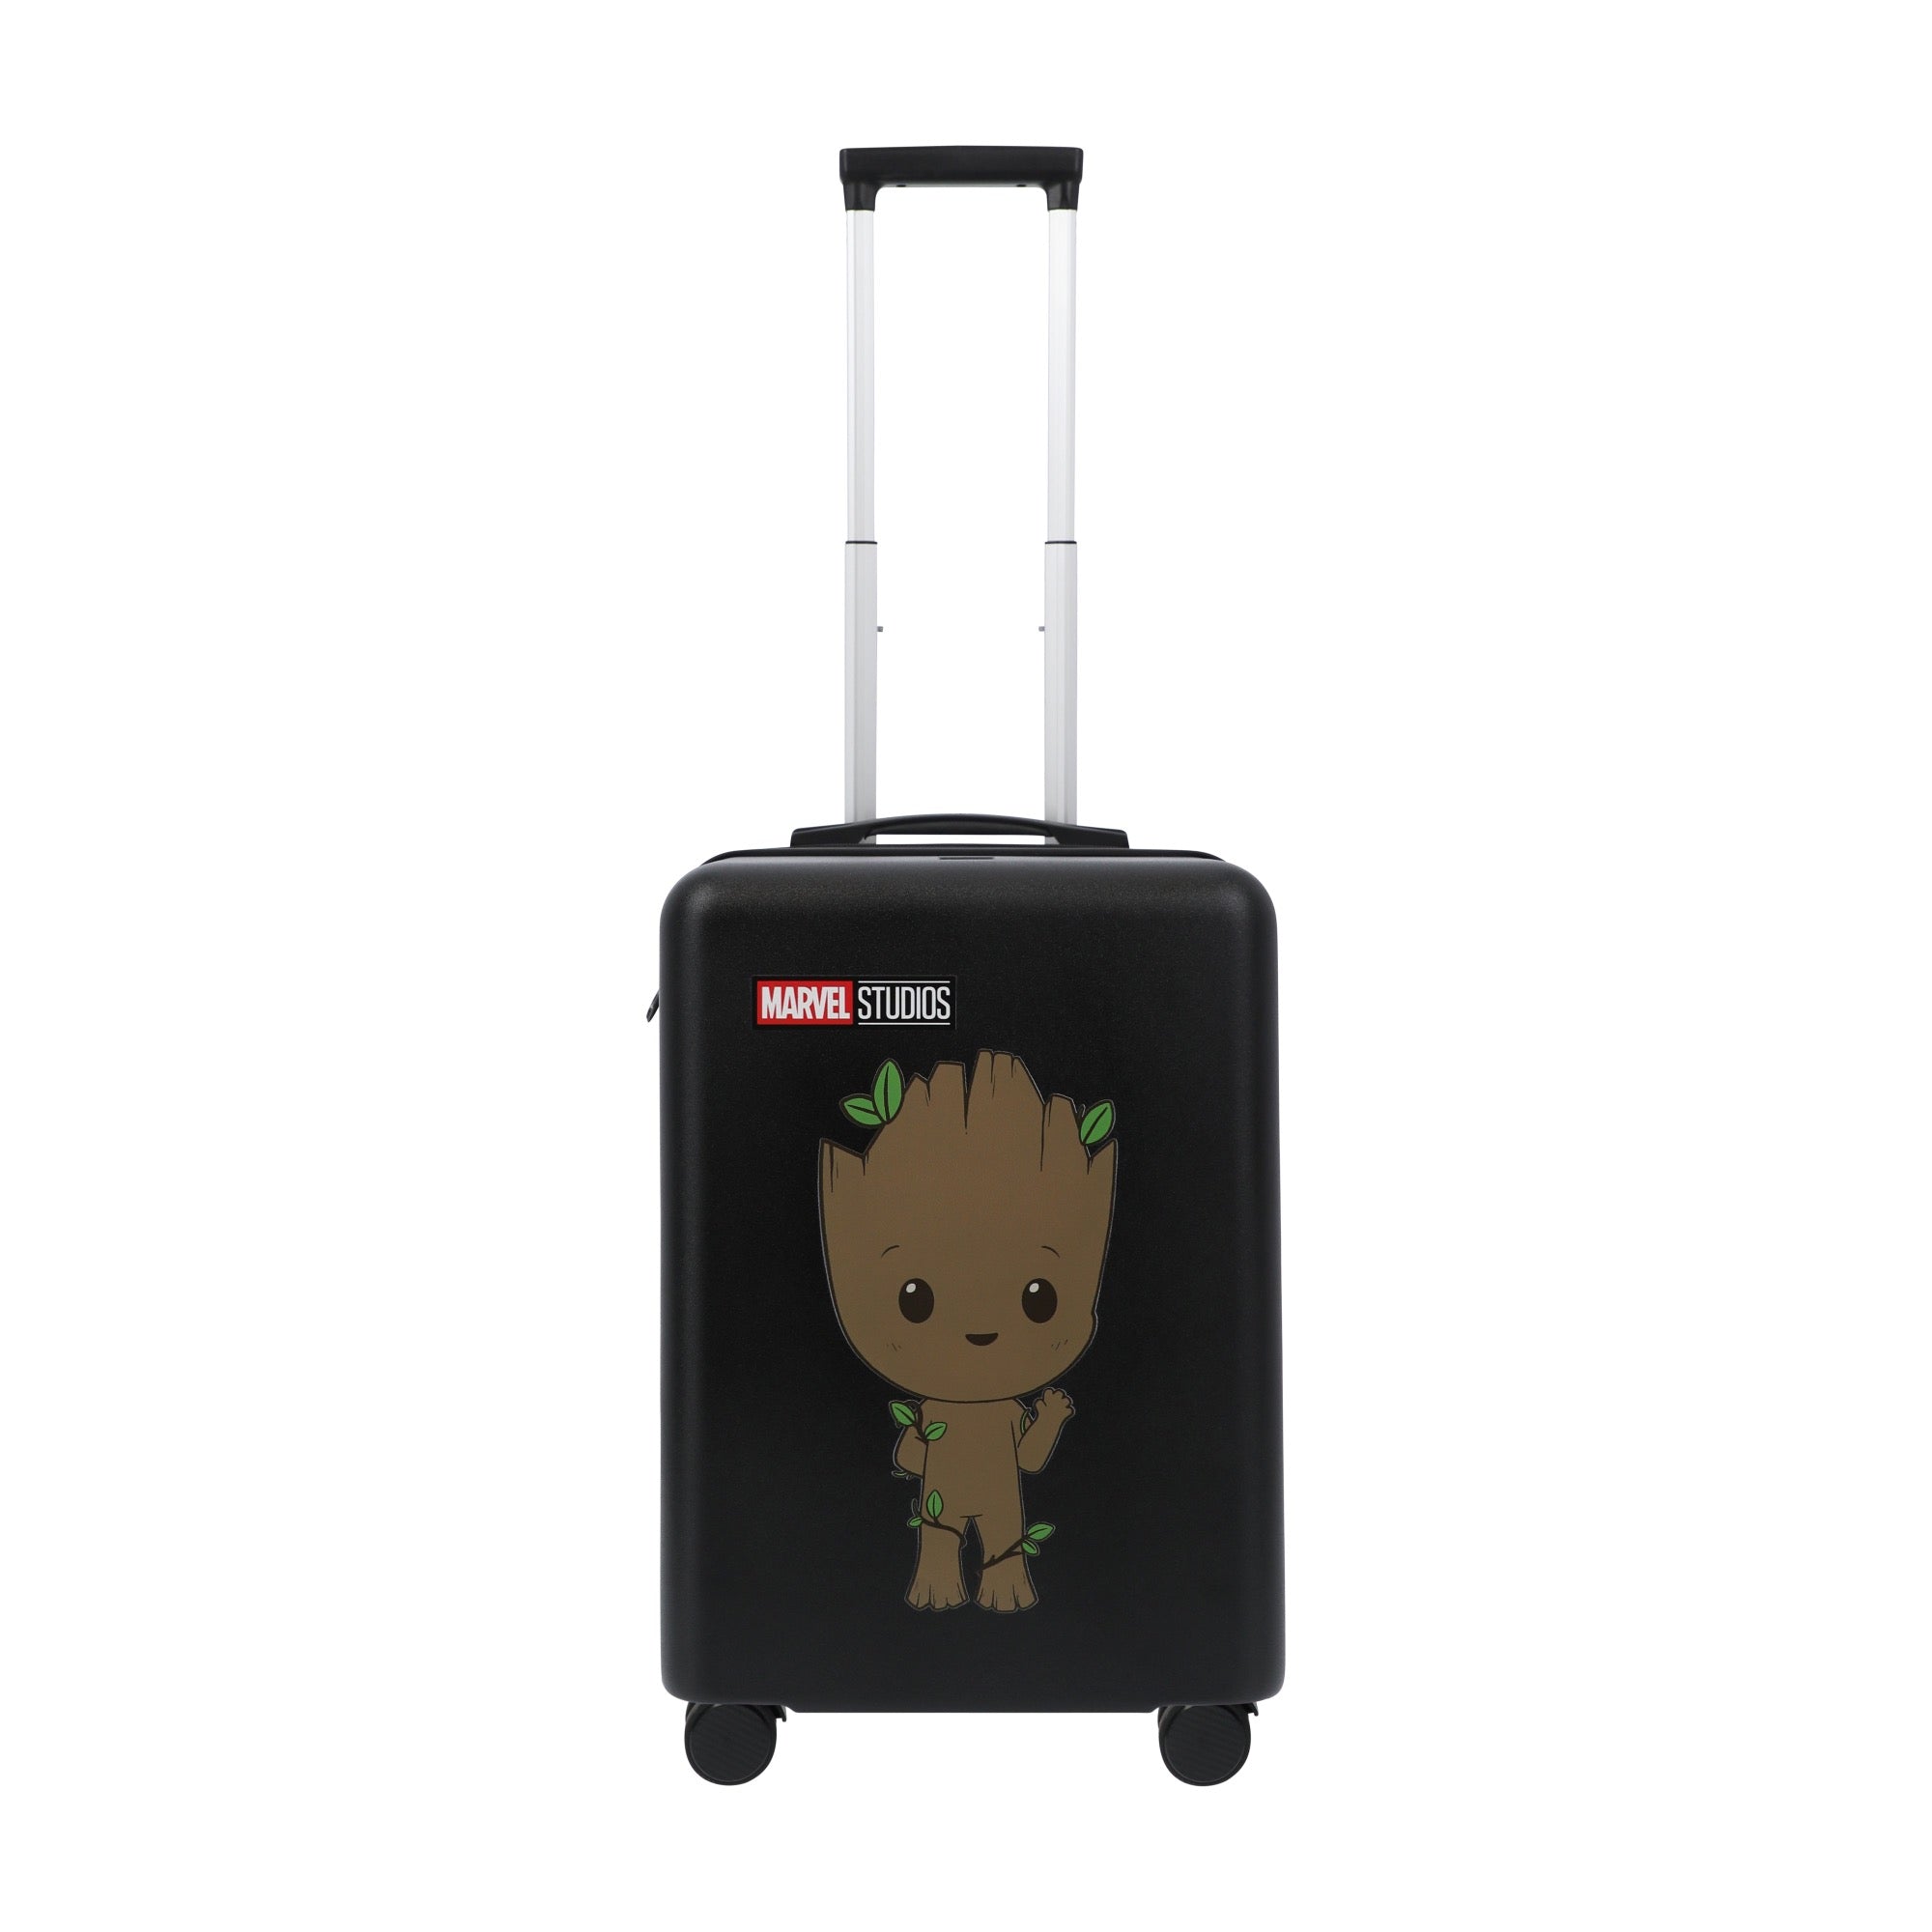 Black marvel baby groot 22.5" carry-on spinner suitcase luggage by Ful